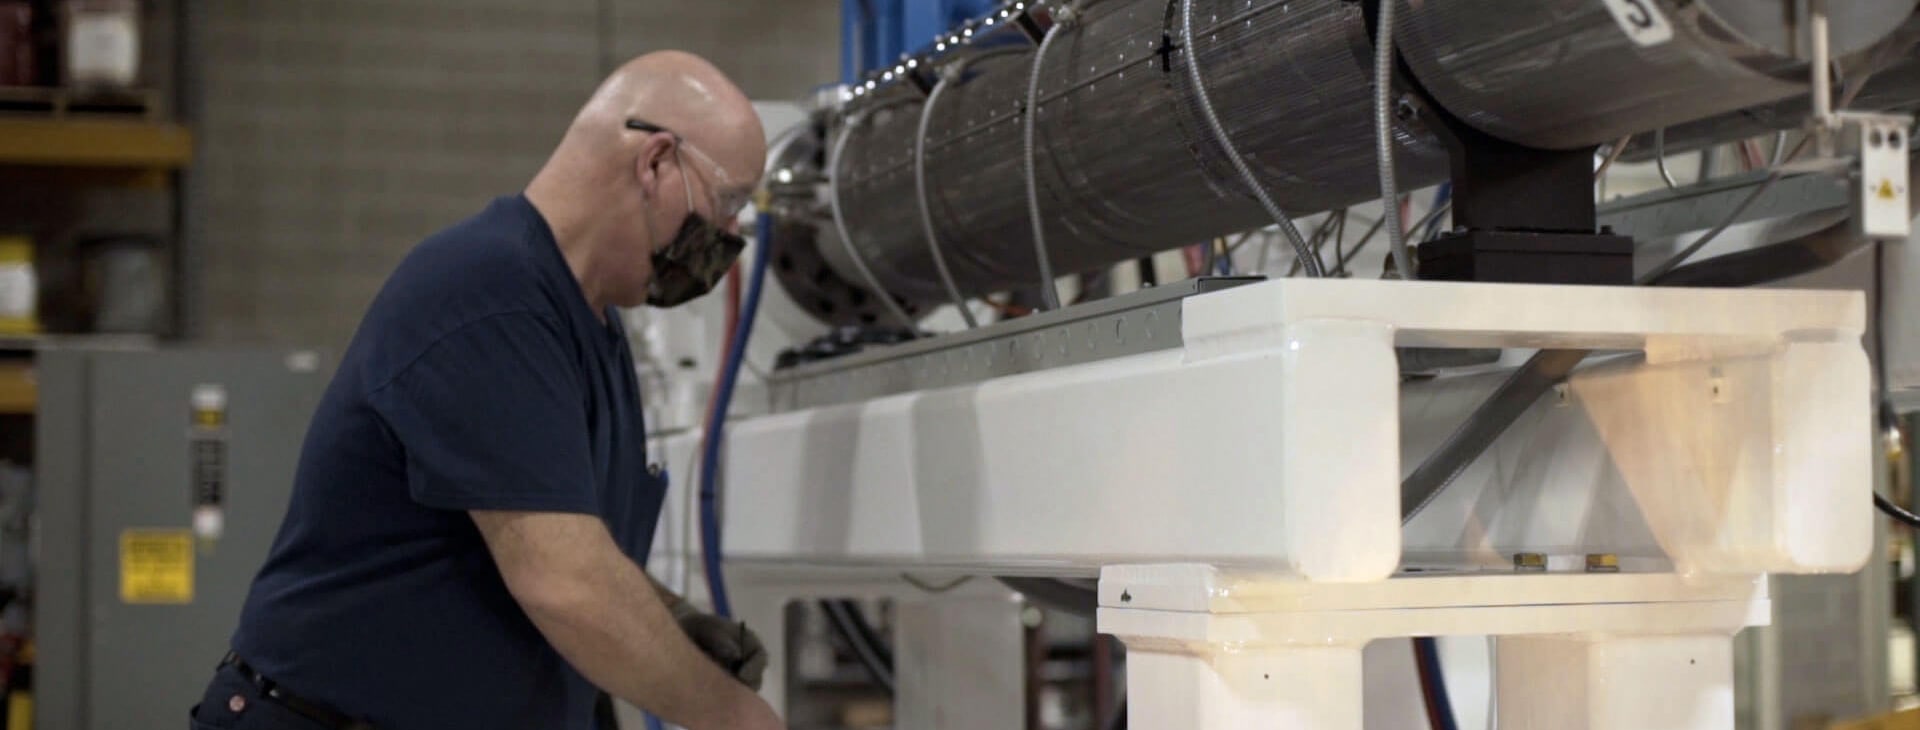 lifecycle management includes maintenance like this Graham employee working on an extruder